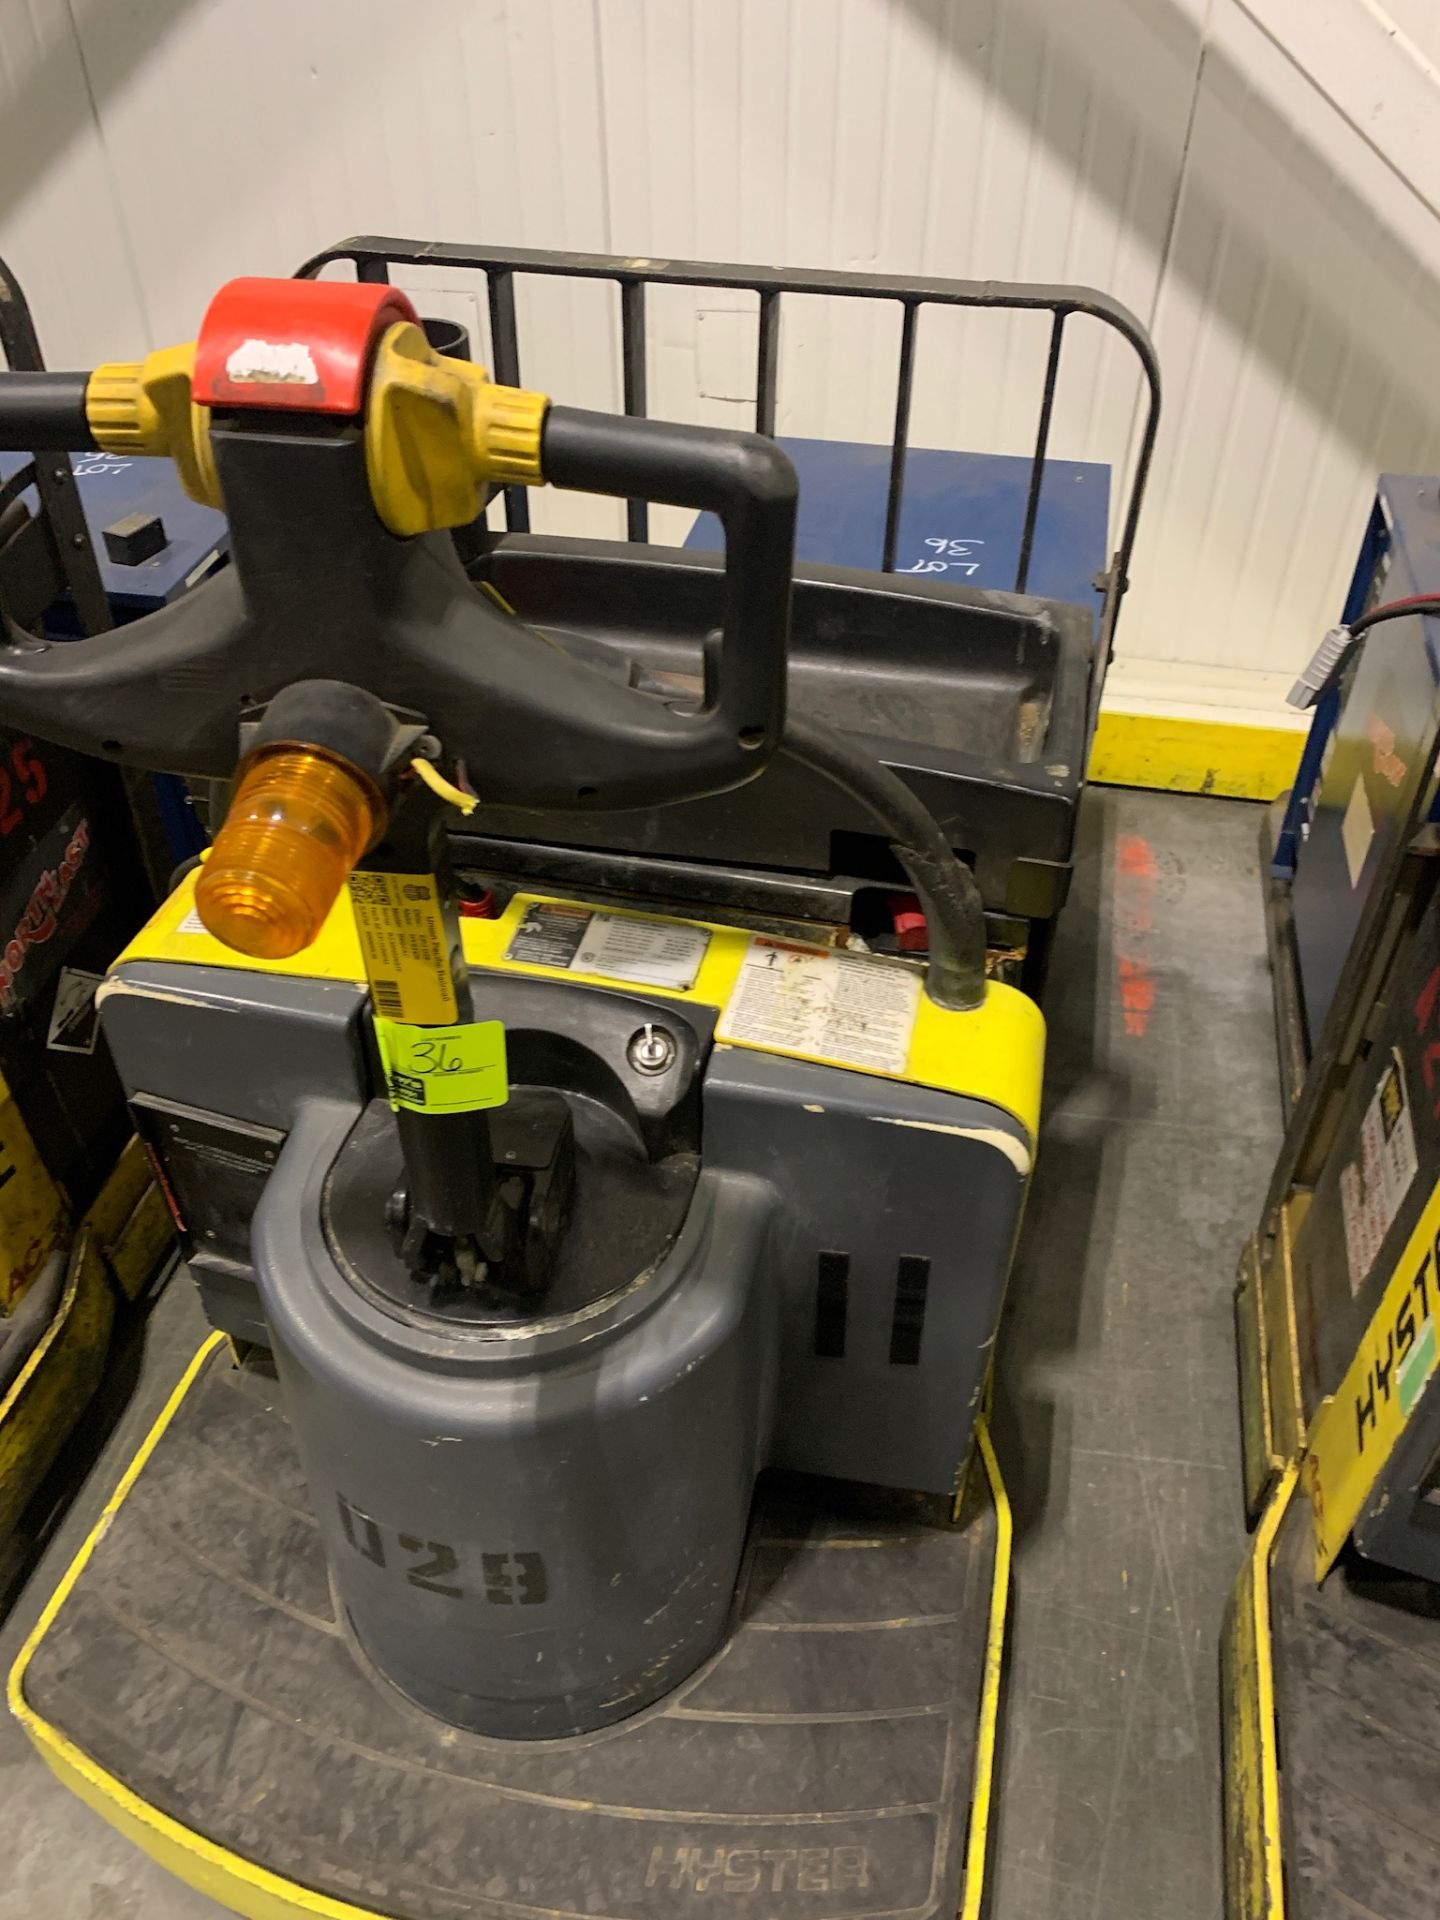 Hyster pallet jack with batter and charger; 7369 HOURS